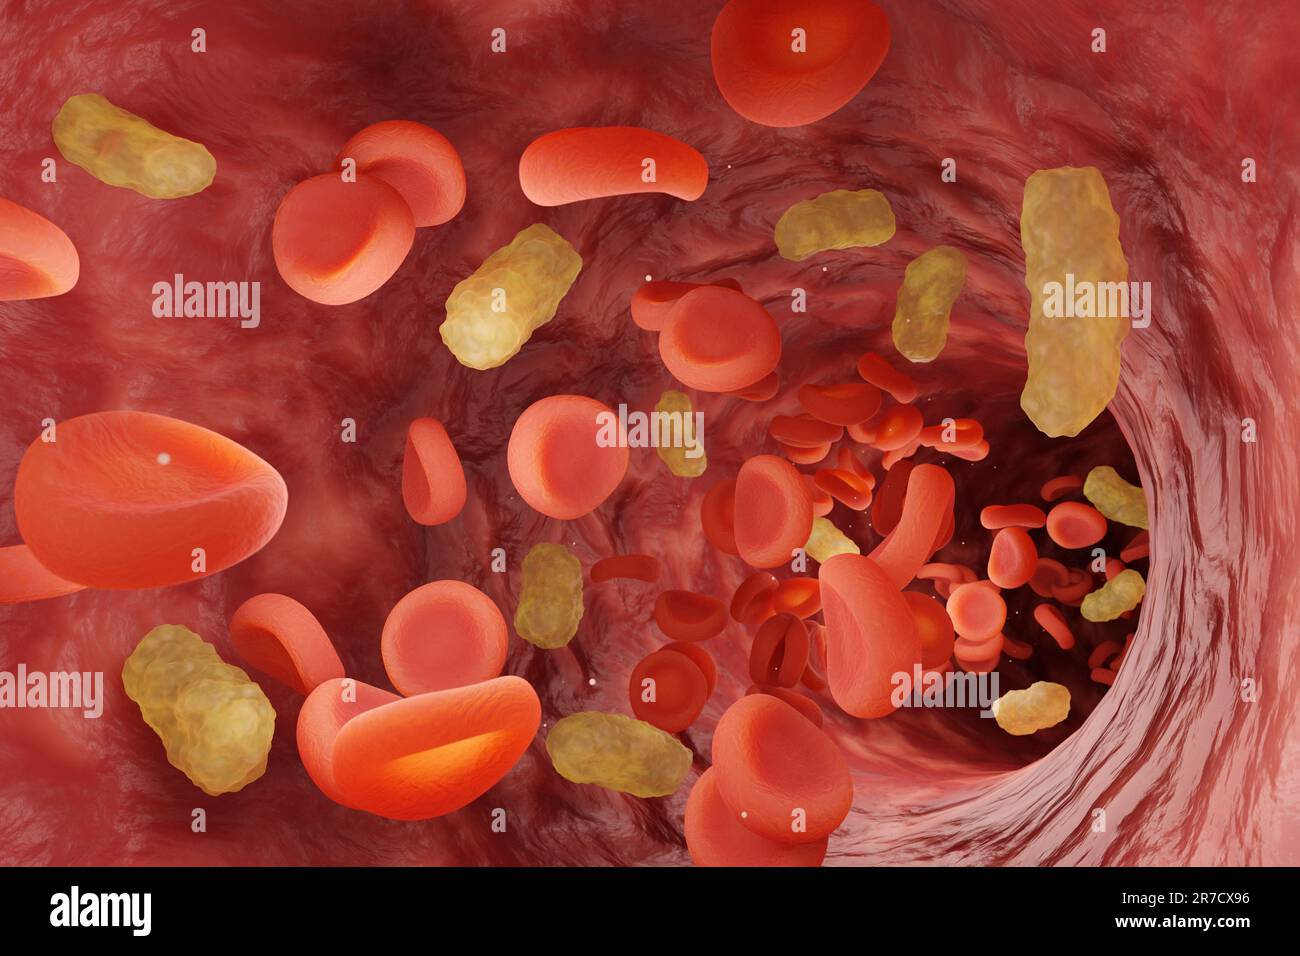 Red blood cells and yellow bacteria flowing in blood vessel. Concept of a severe medical condition sepsis in which bacteria enter the blood Stock Photo